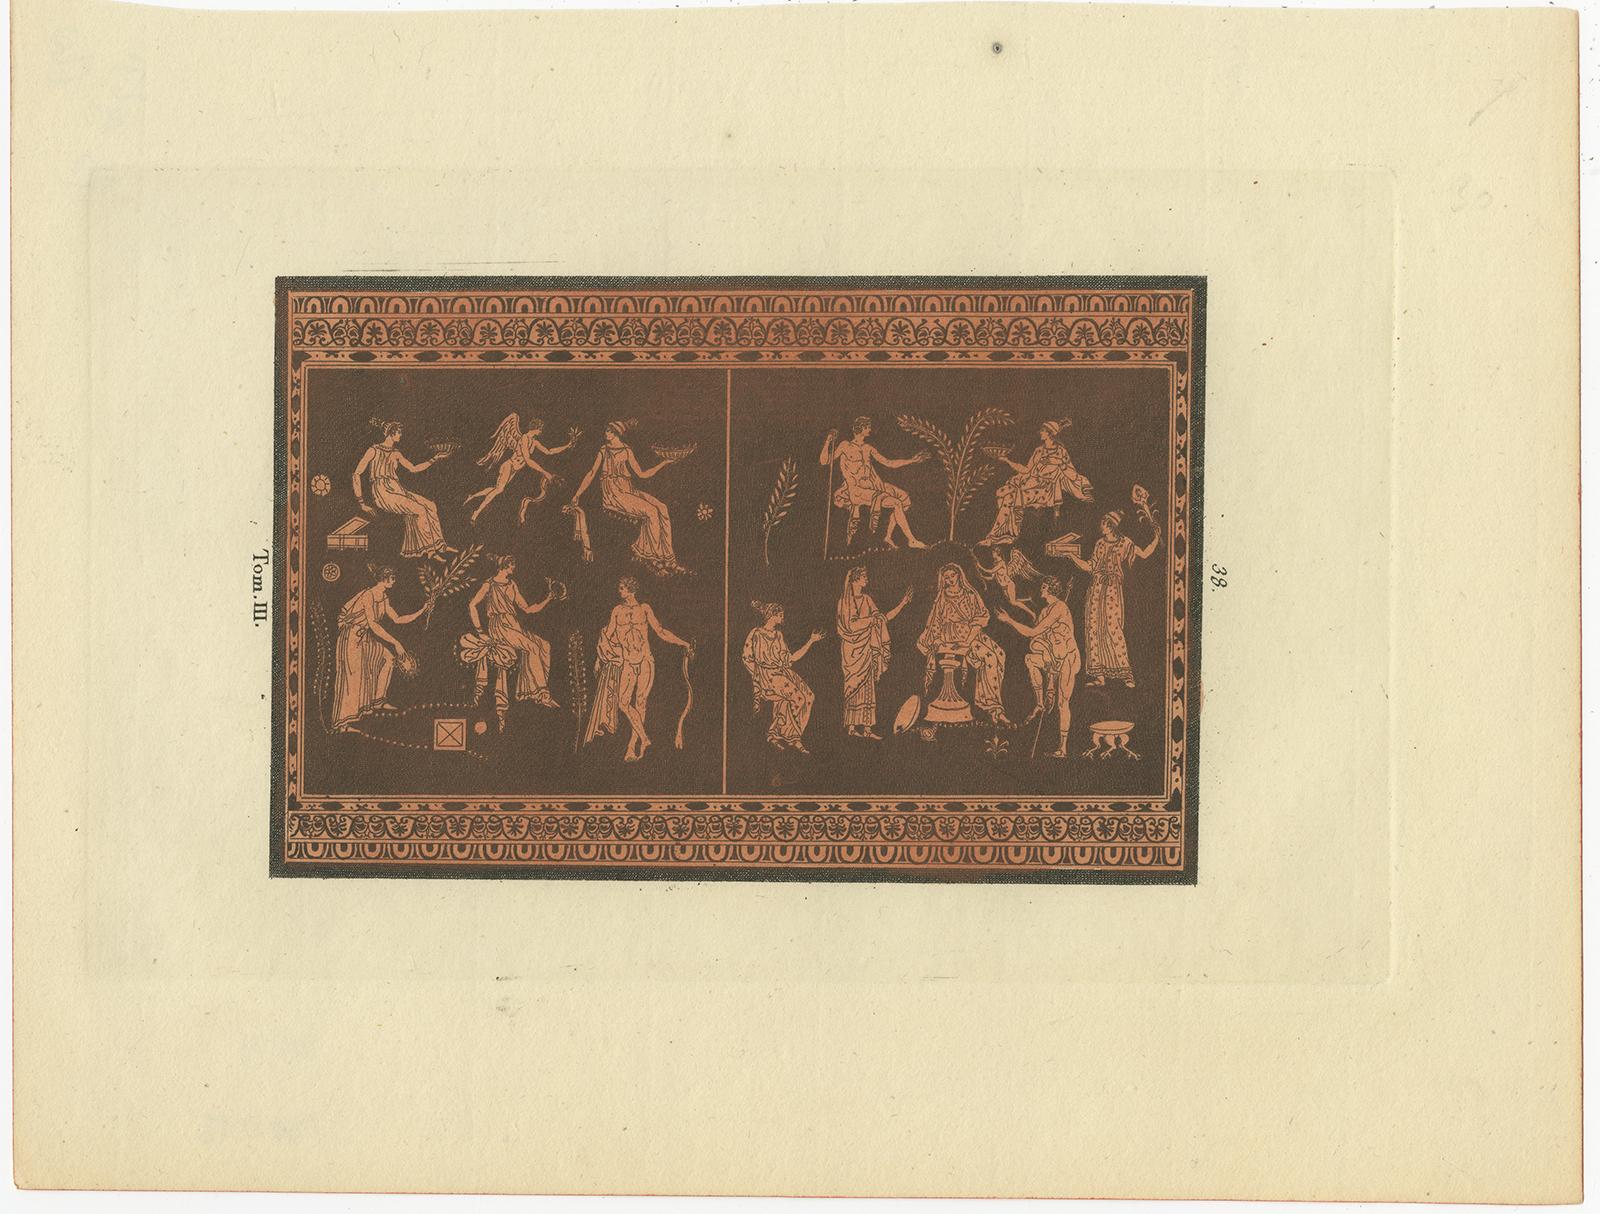 Set of two antique prints depicting various figures and scenes. Most likely, these antique prints show the design of vases. Source unknown, to be determined.